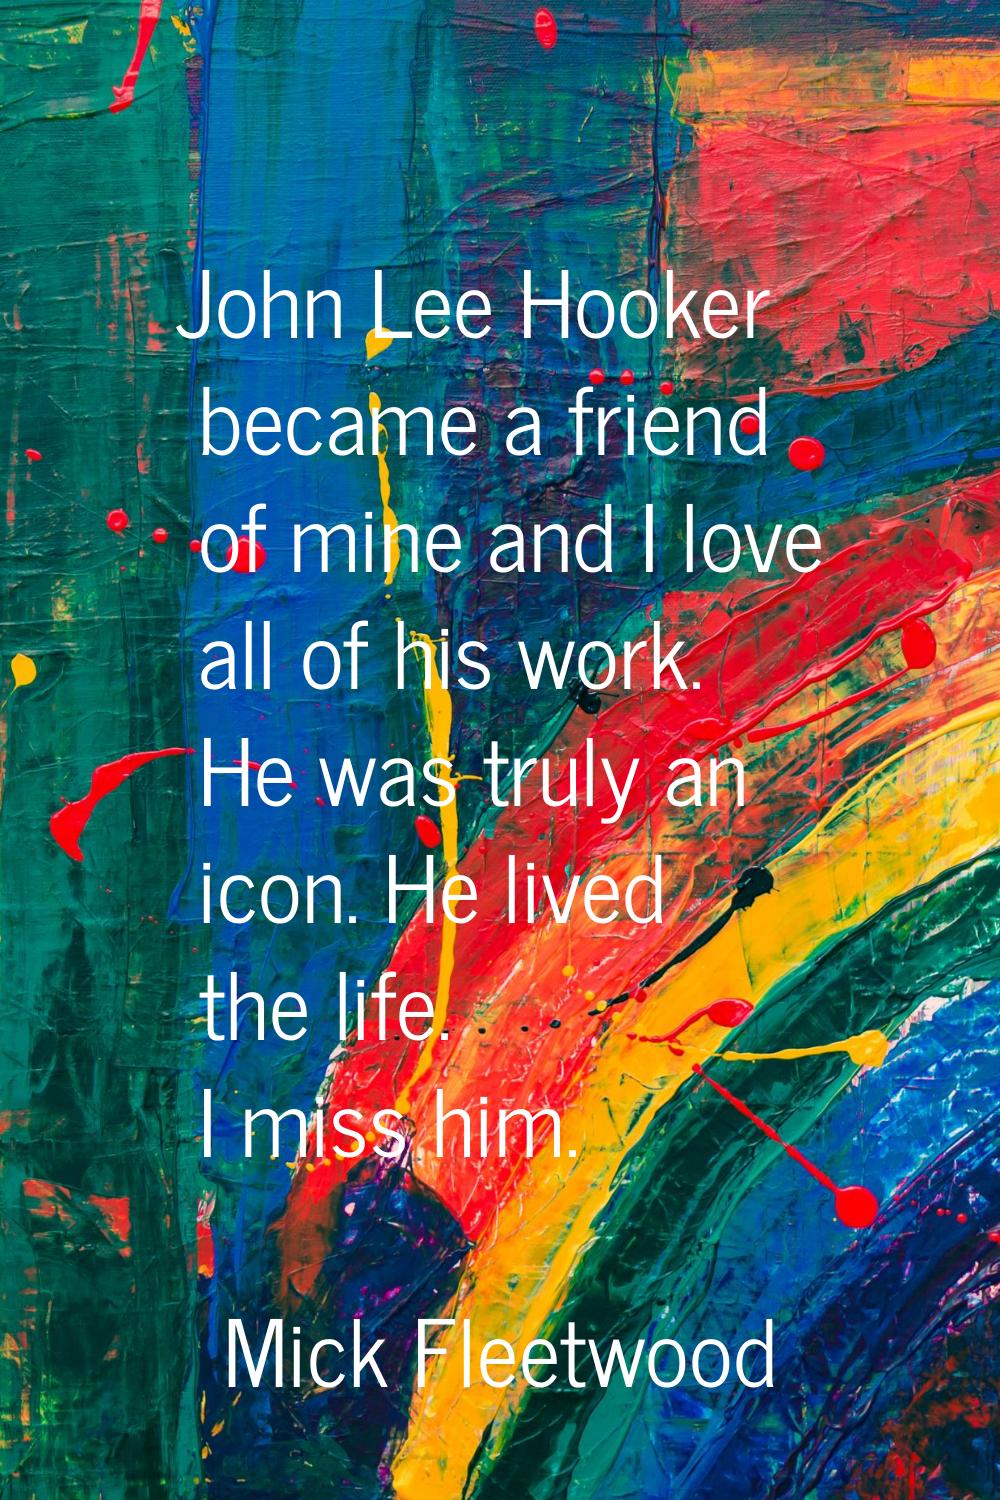 John Lee Hooker became a friend of mine and I love all of his work. He was truly an icon. He lived 